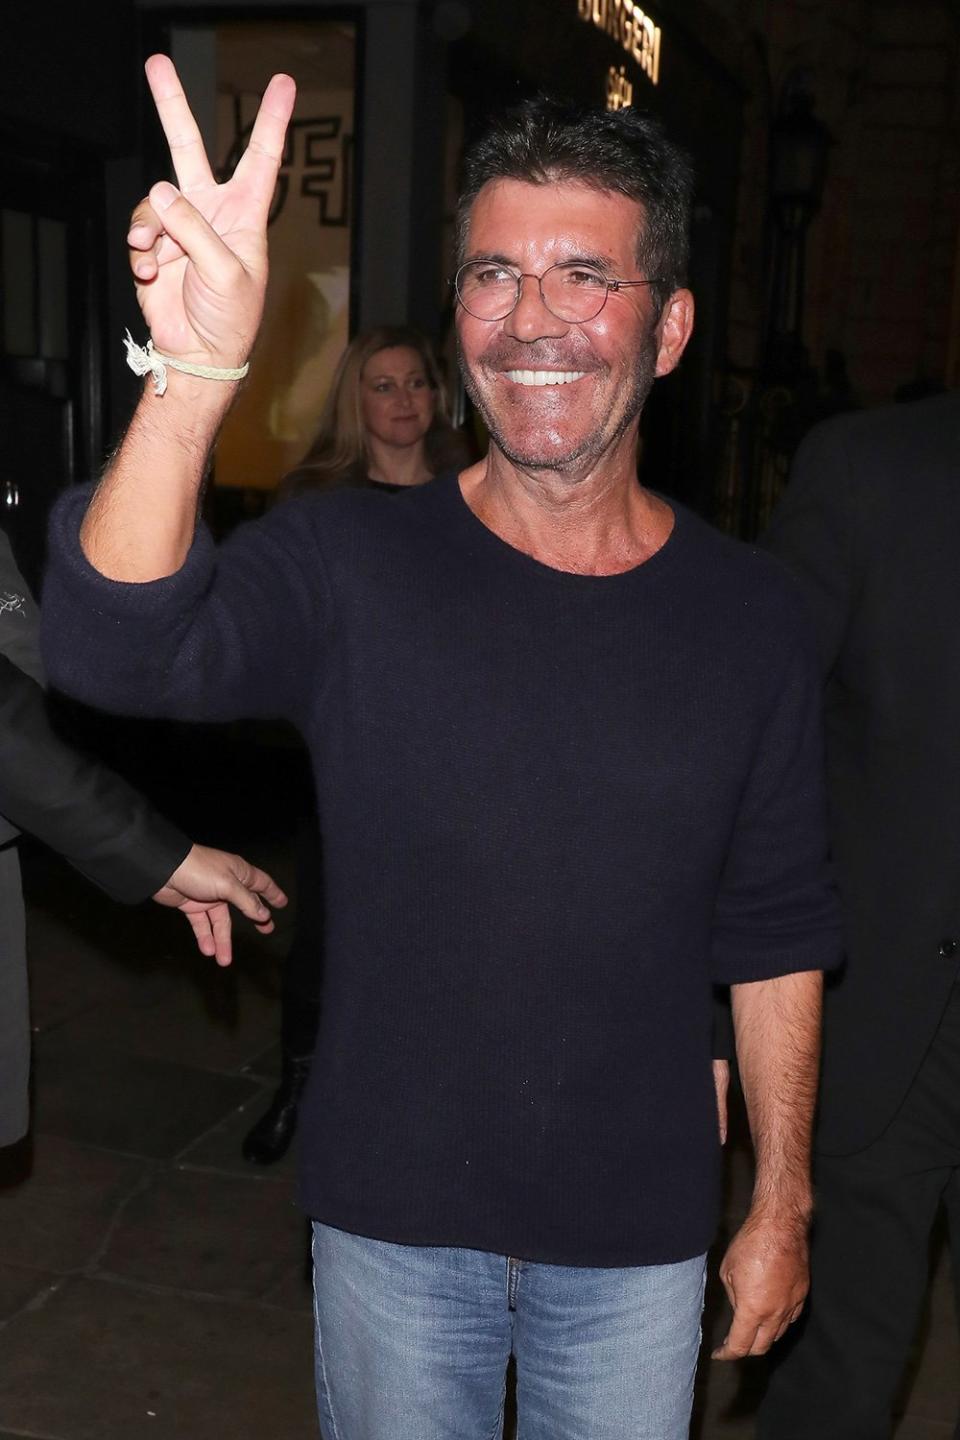 Simon Cowell greets fans as he leaves the London Palladium on Monday in England.